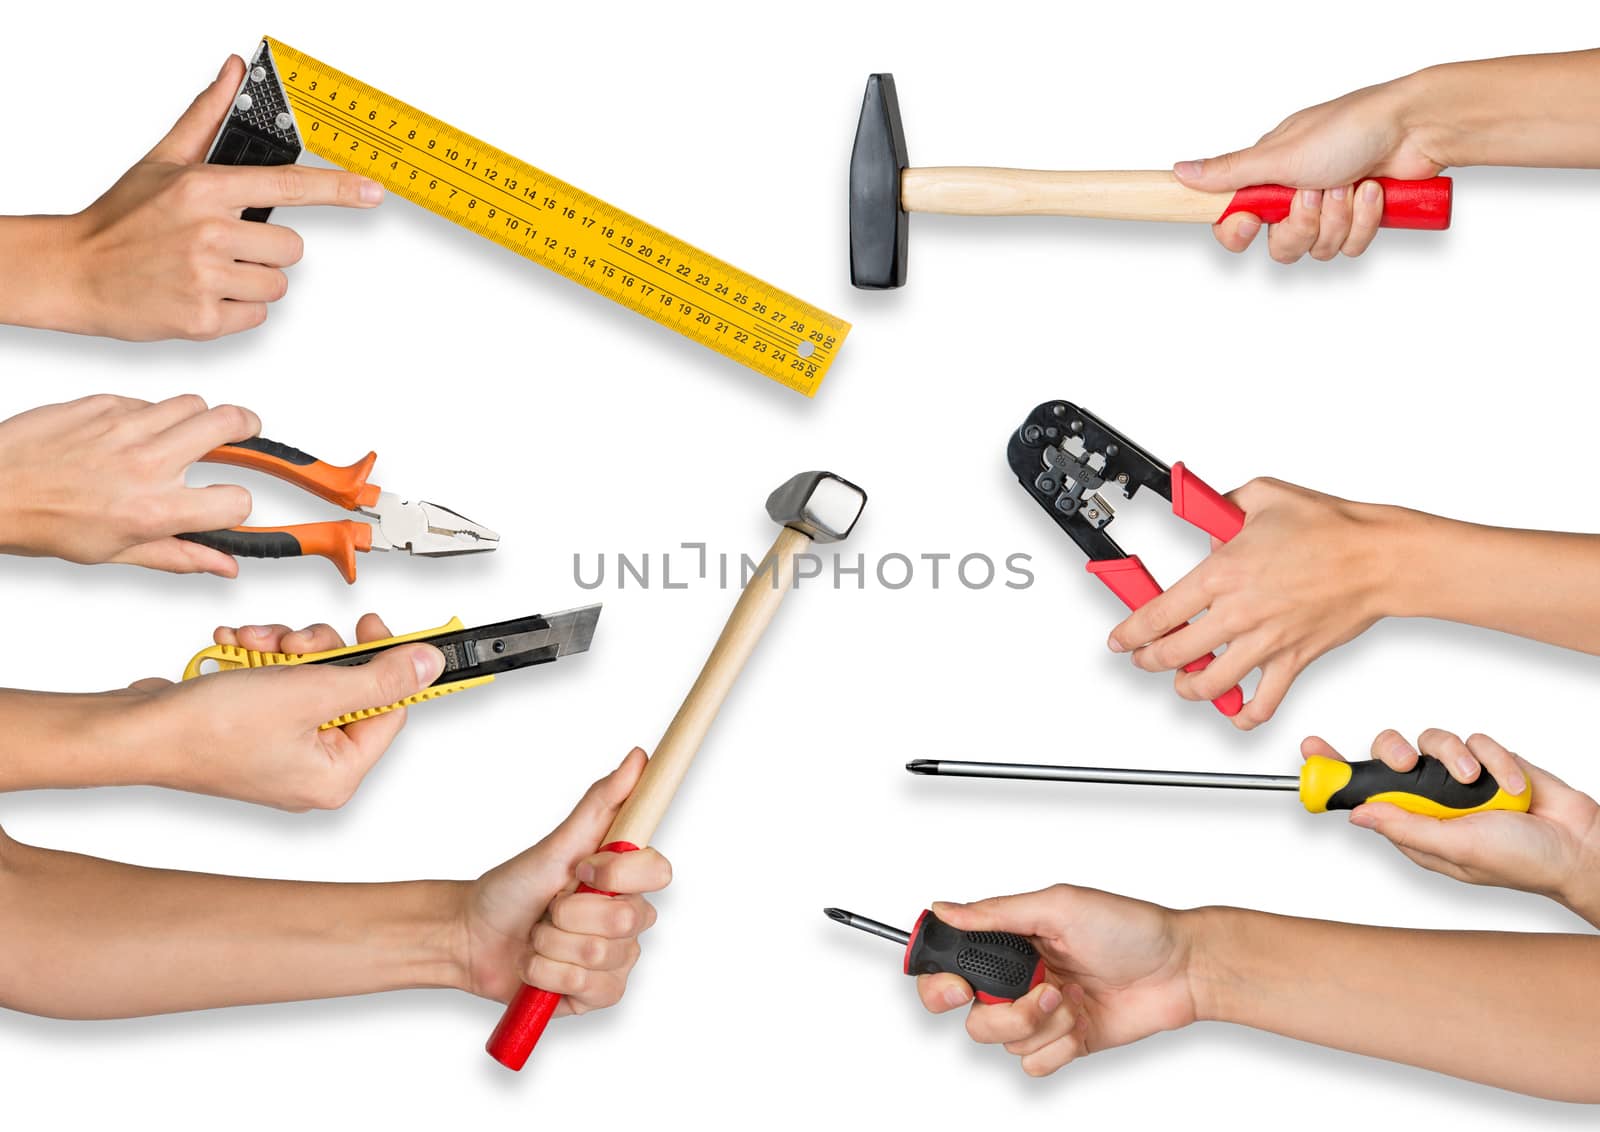 Set of peoples hands holding different tools on isolated white background